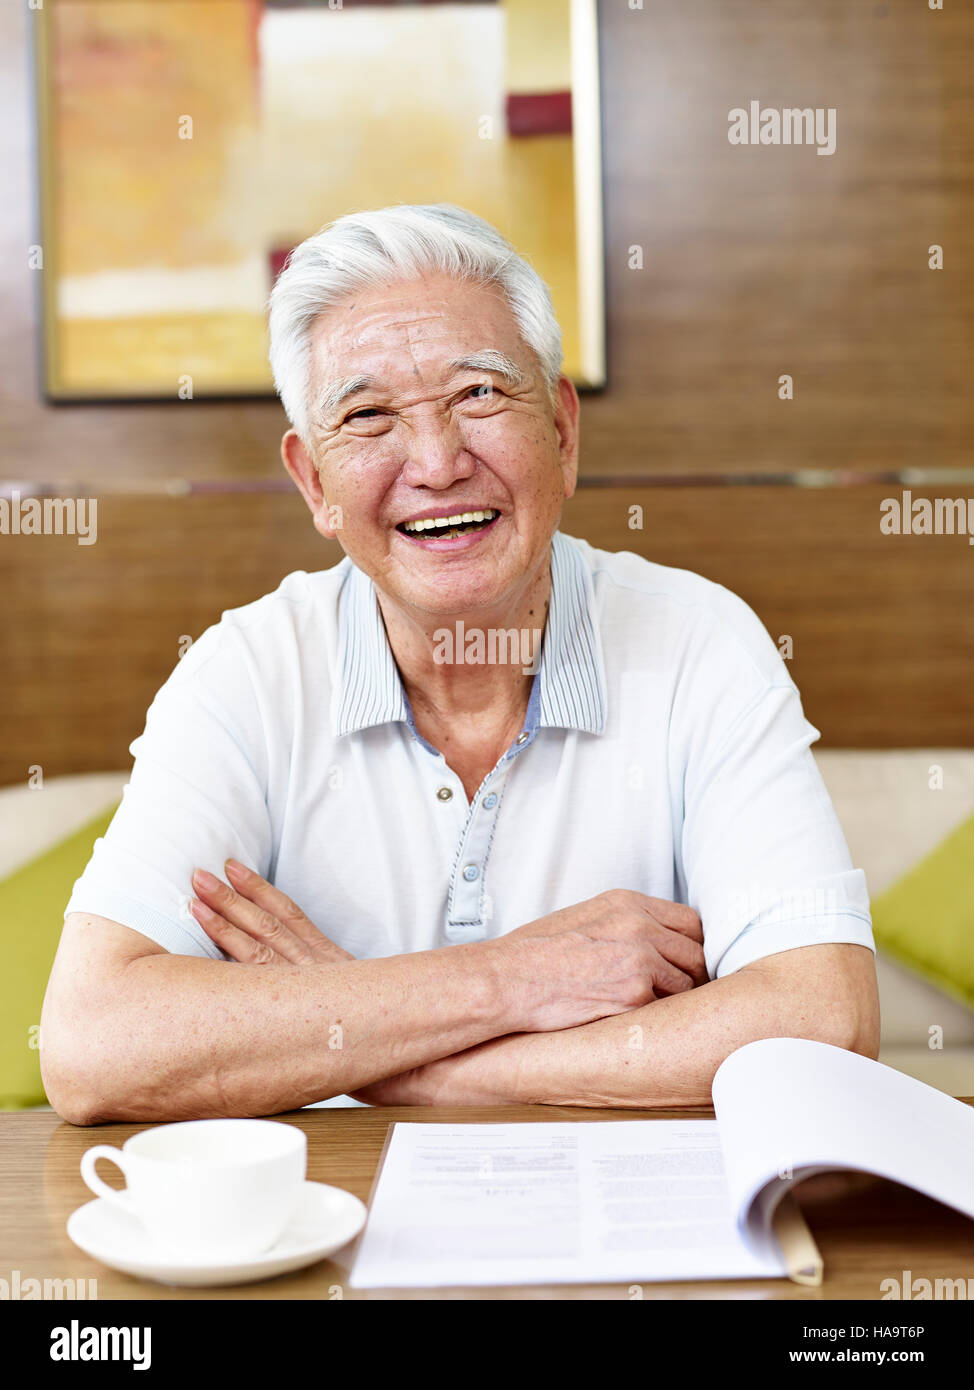 senior asian man reading a book or document in study room Stock Photo